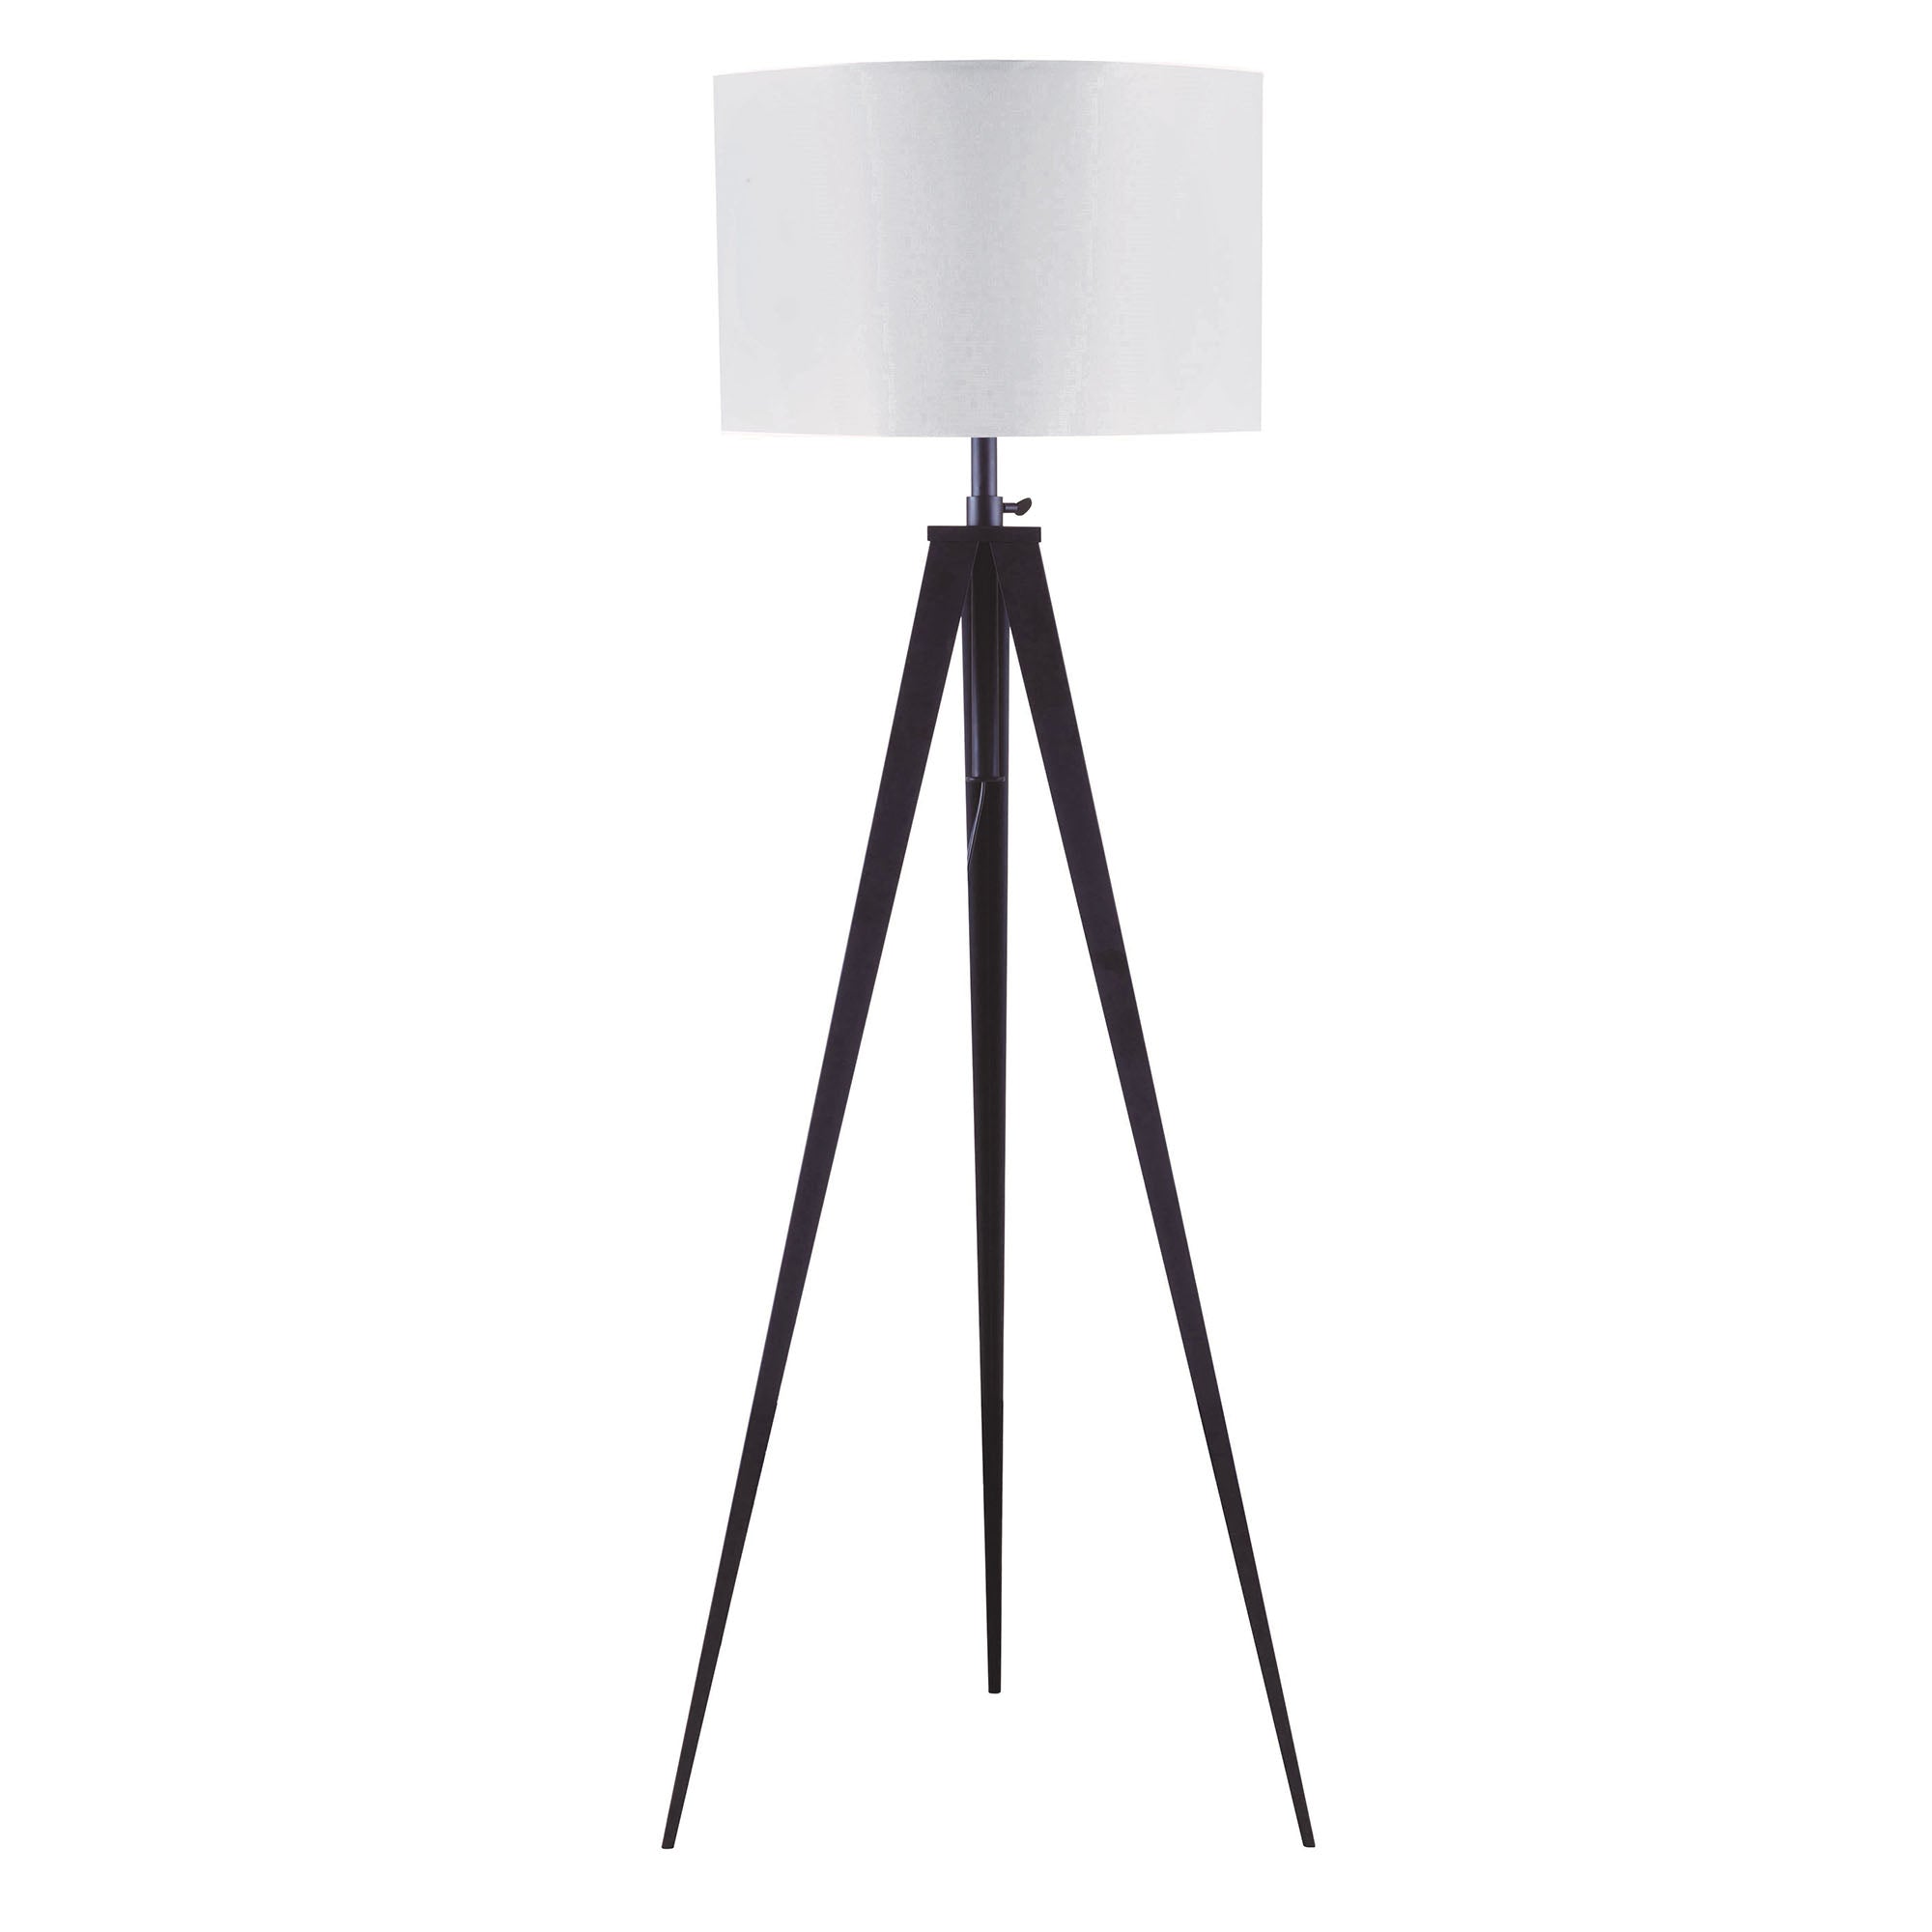 73" x 20" x 20" Metal and Fabric White Floor Lamp with Fabric Drum Shaped Shade and Tripod Base